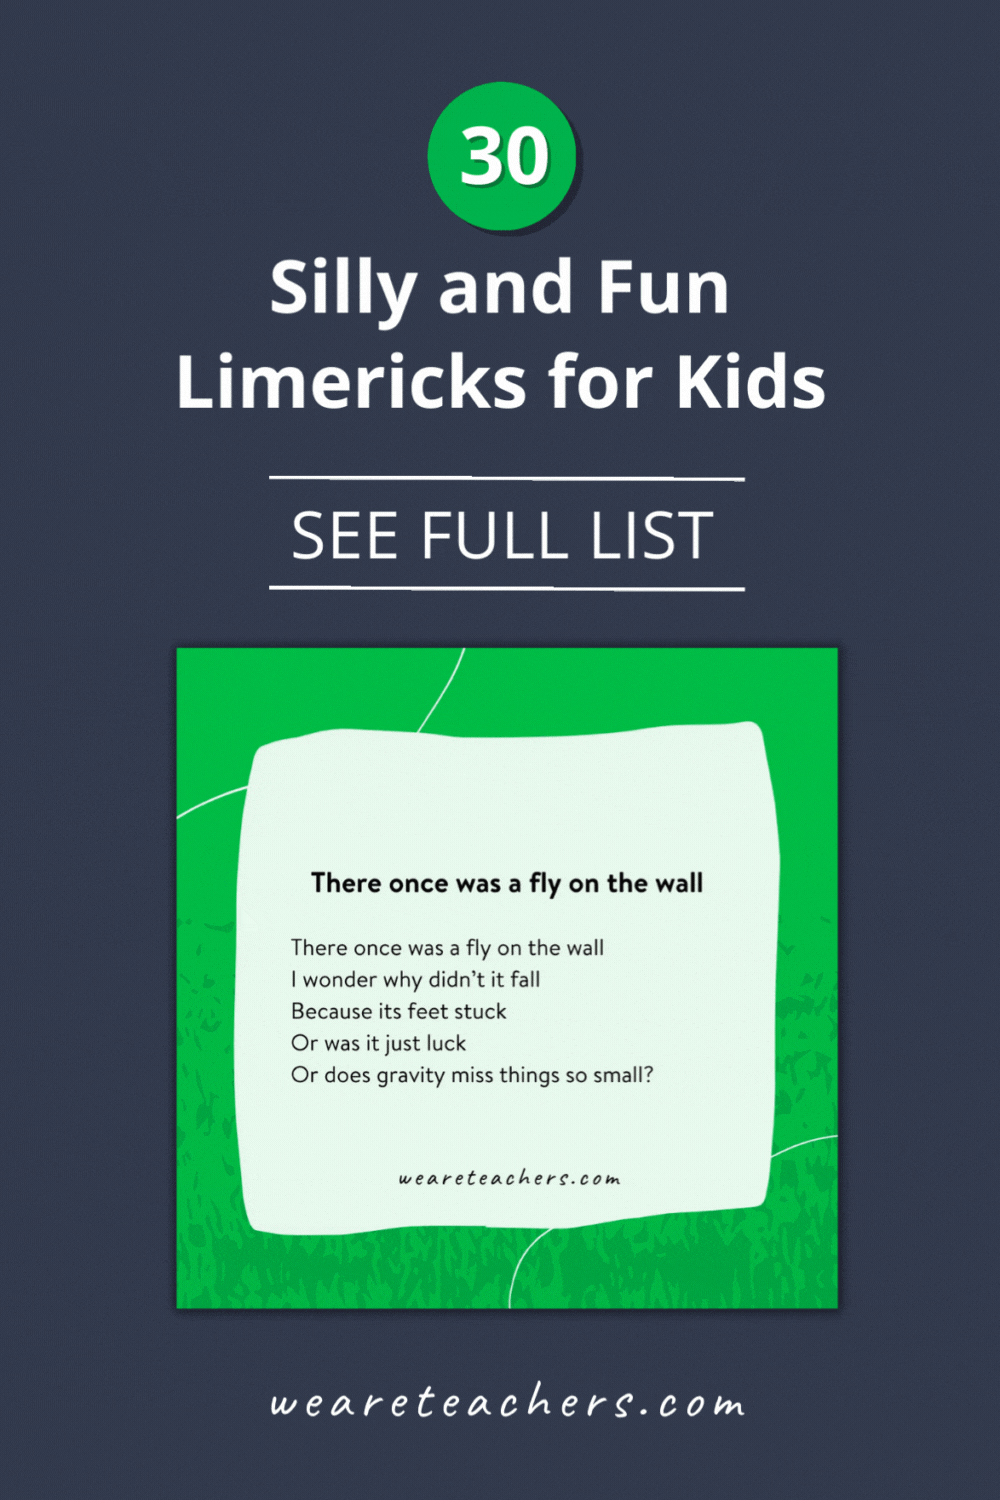 Looking for a quick, fun poetry form to share with students? This list of limericks for kids is perfect for the sharing some laughs!